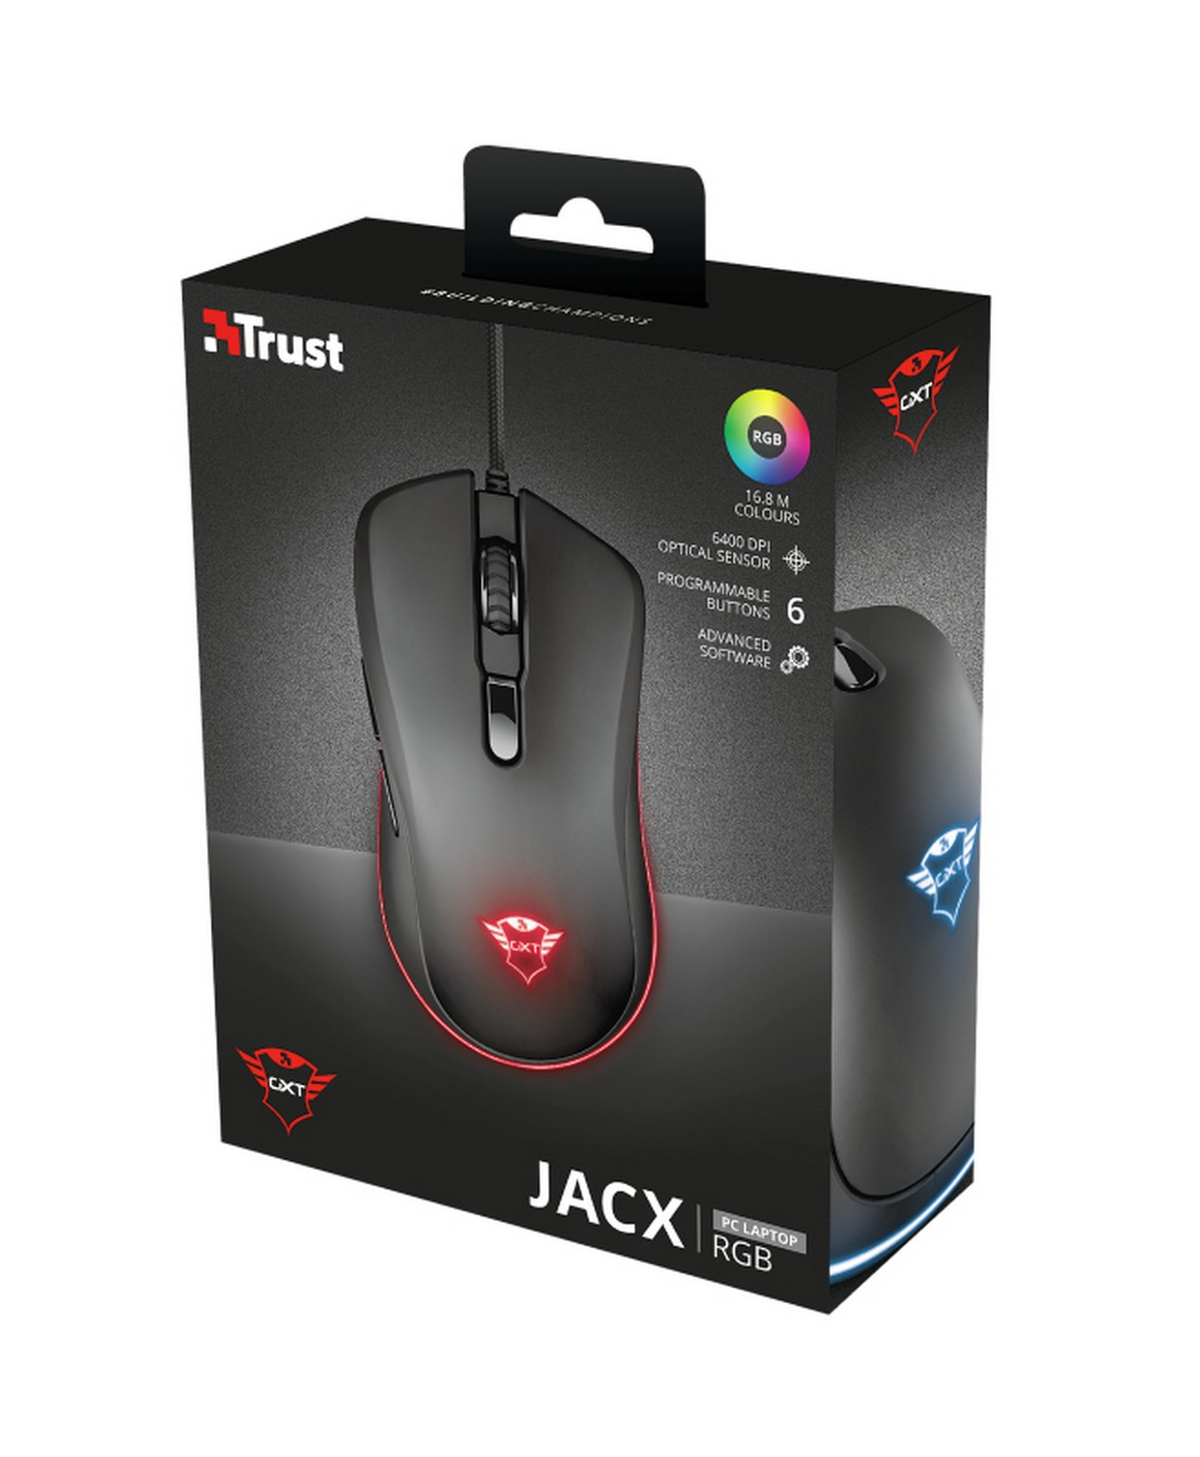 Gaming GAMING GXT MOUSE TRUST 23575 930 JACX Schwarz RGB Maus,